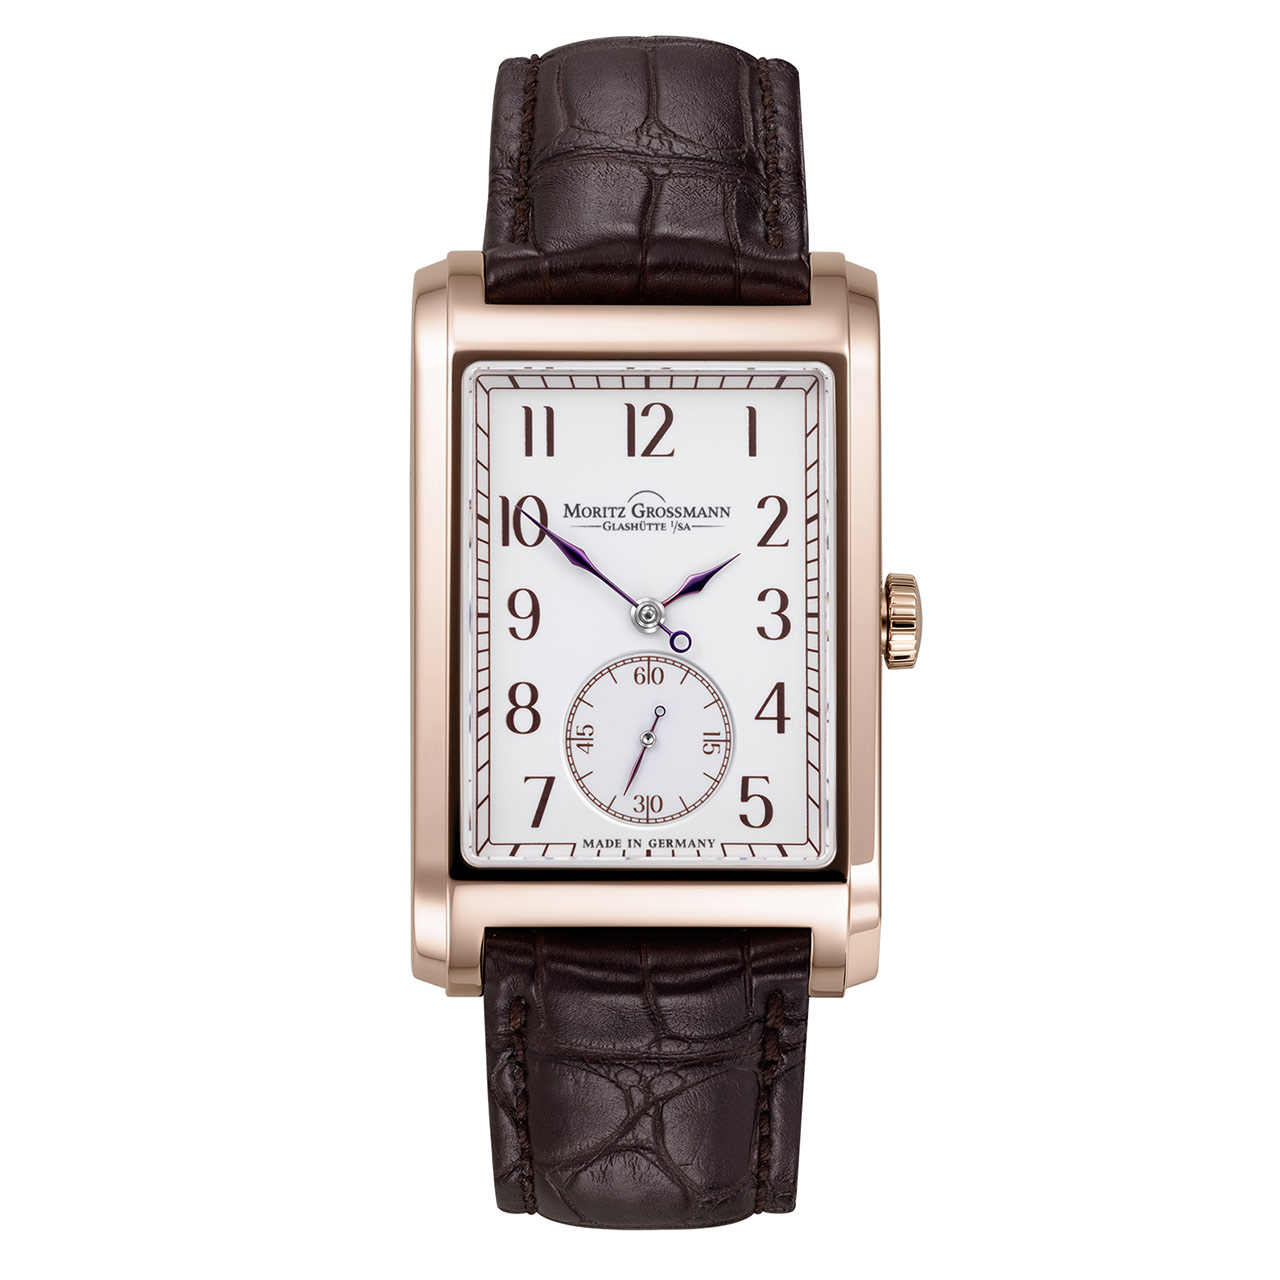 Moritz Grossmann - Corner Stone Collection | Time and Watches | The ...